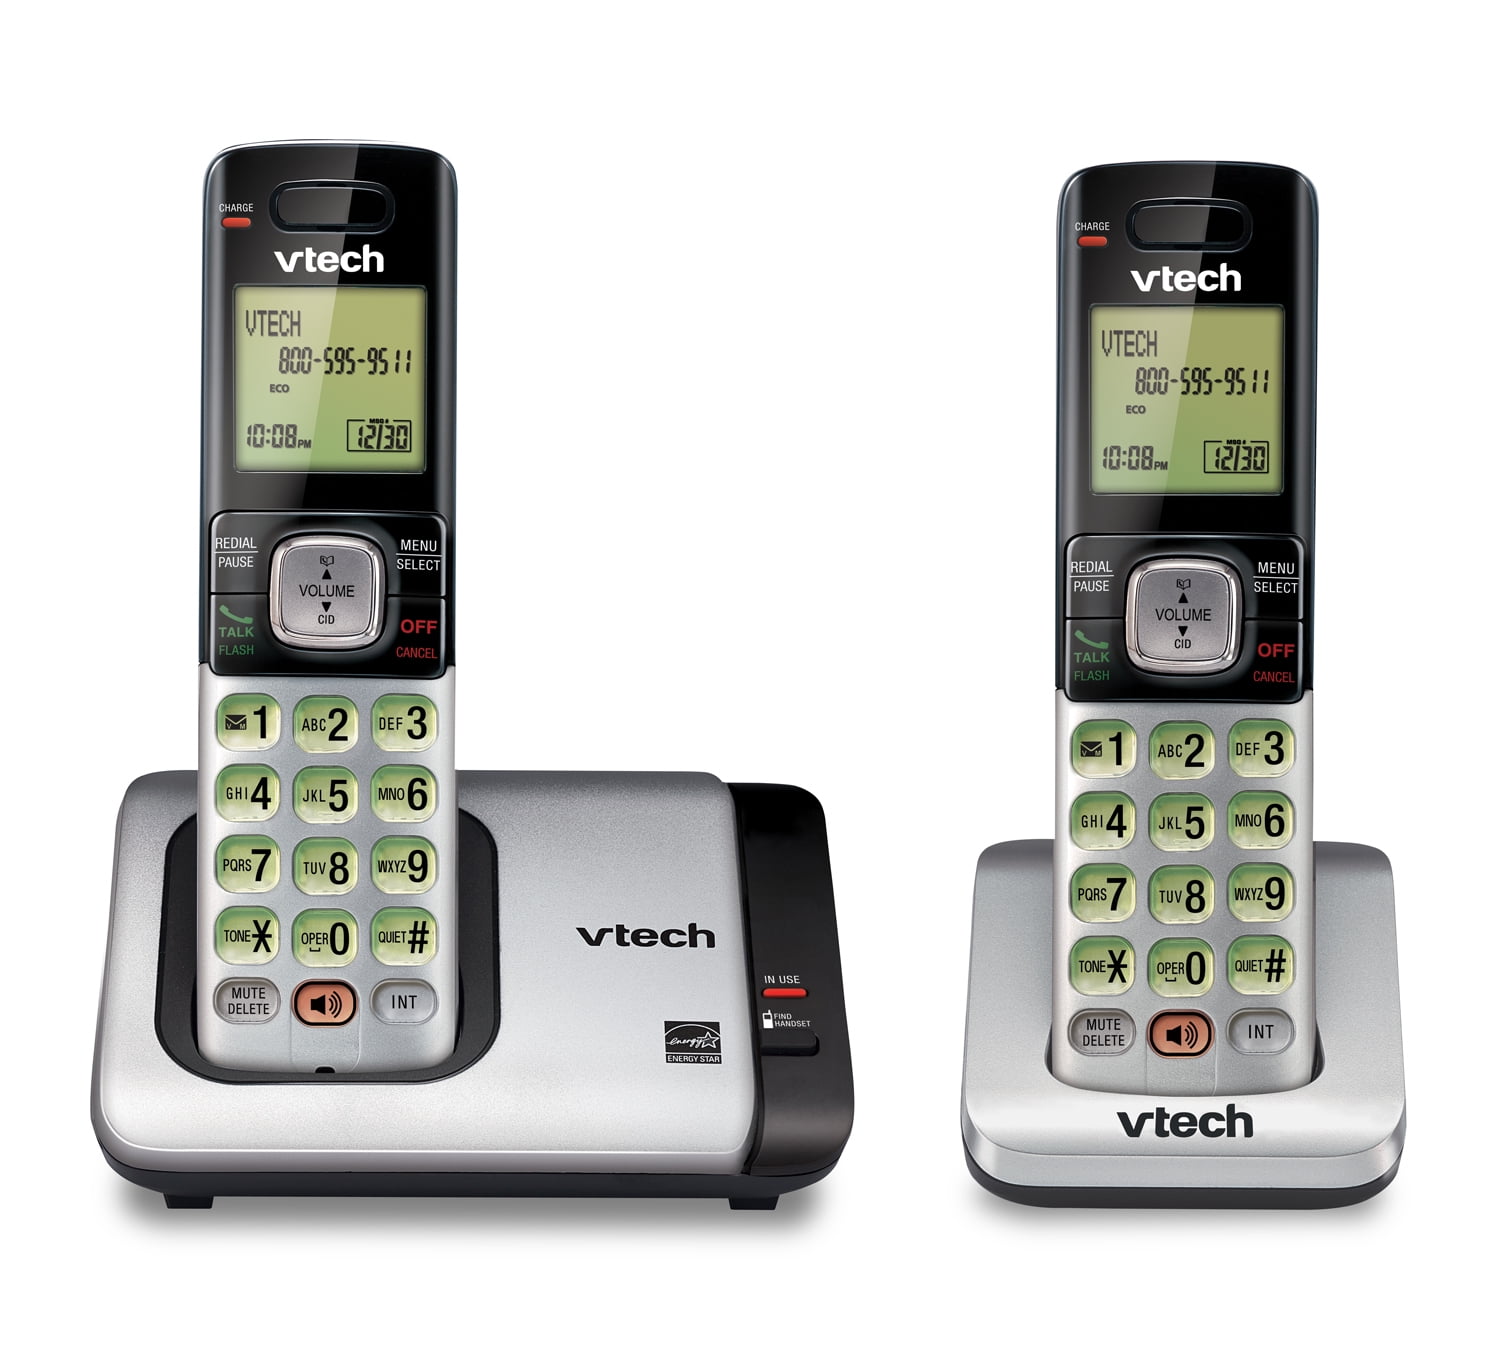 CS6619-2 Vtech Cordless Phone with Accessory Handset & Backlit LCD Display 